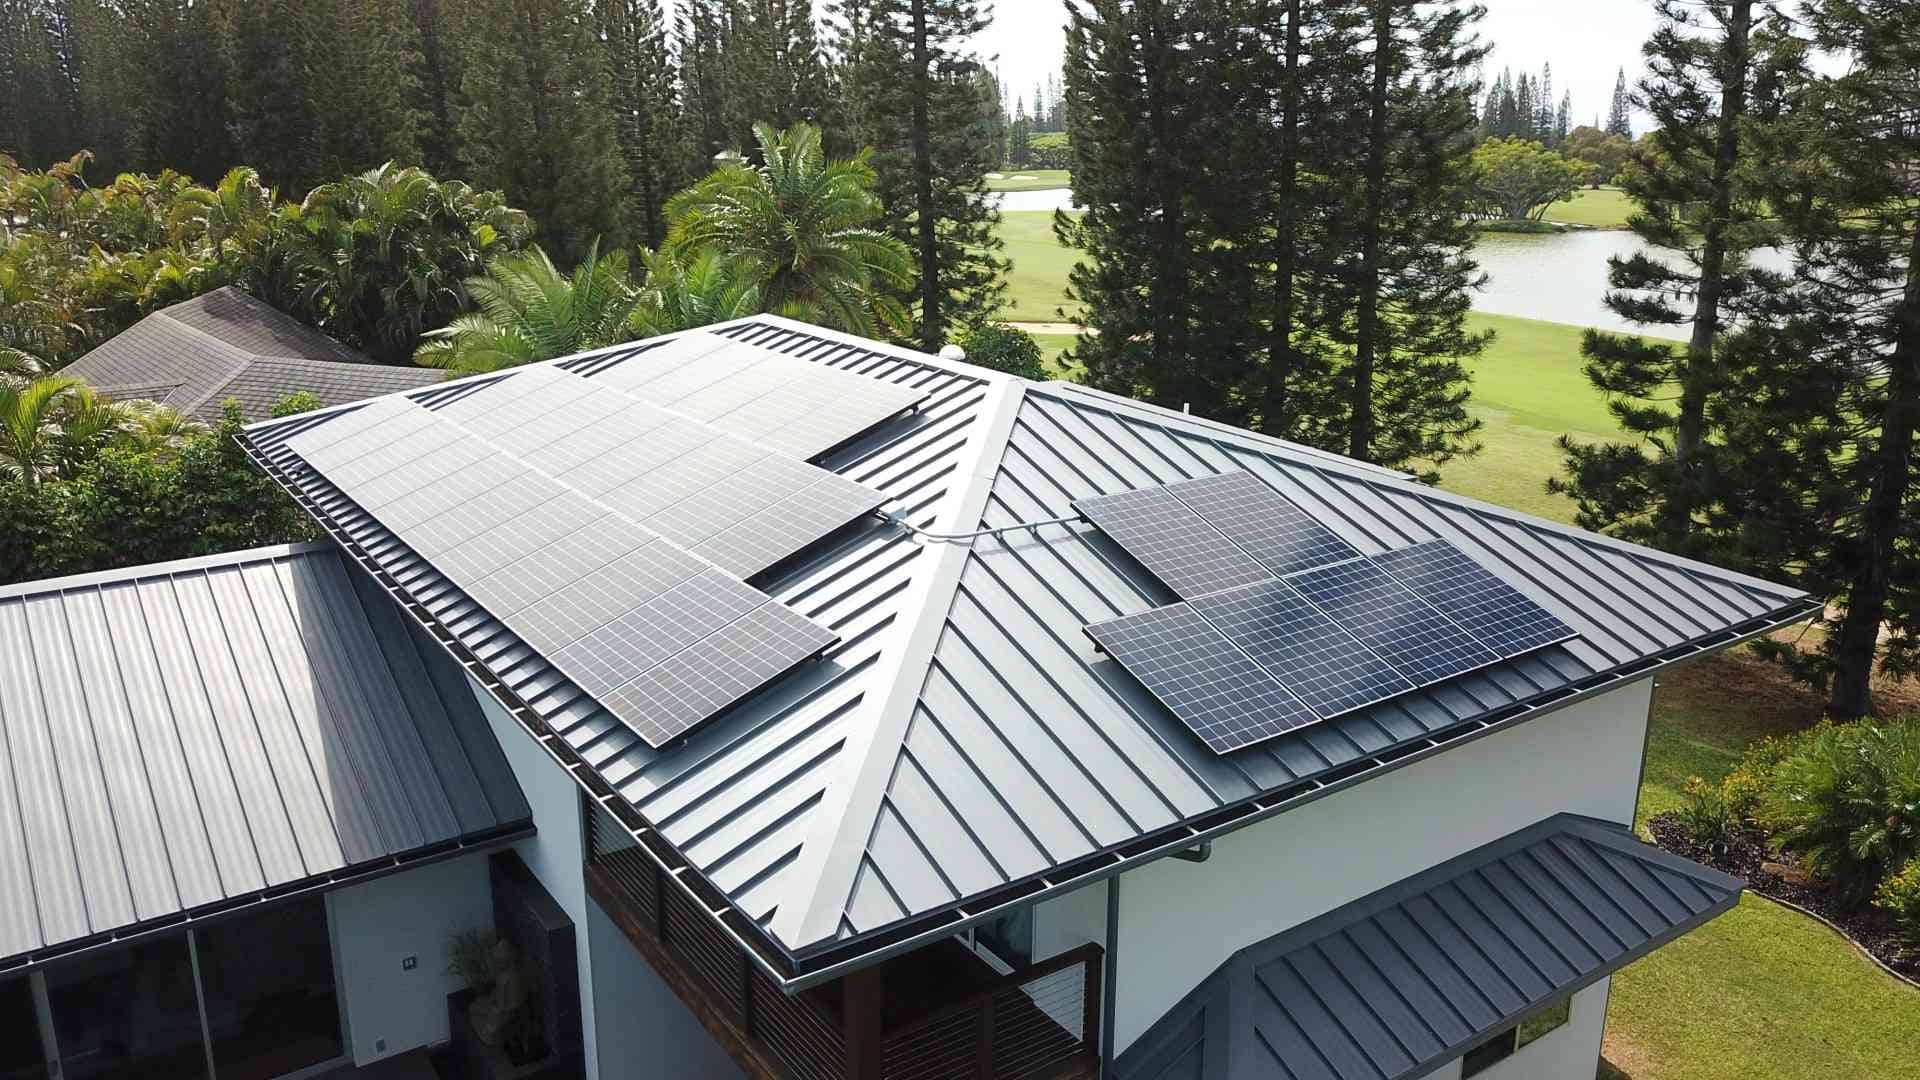 solar panels on a metal roof in Hawaii with pine trees